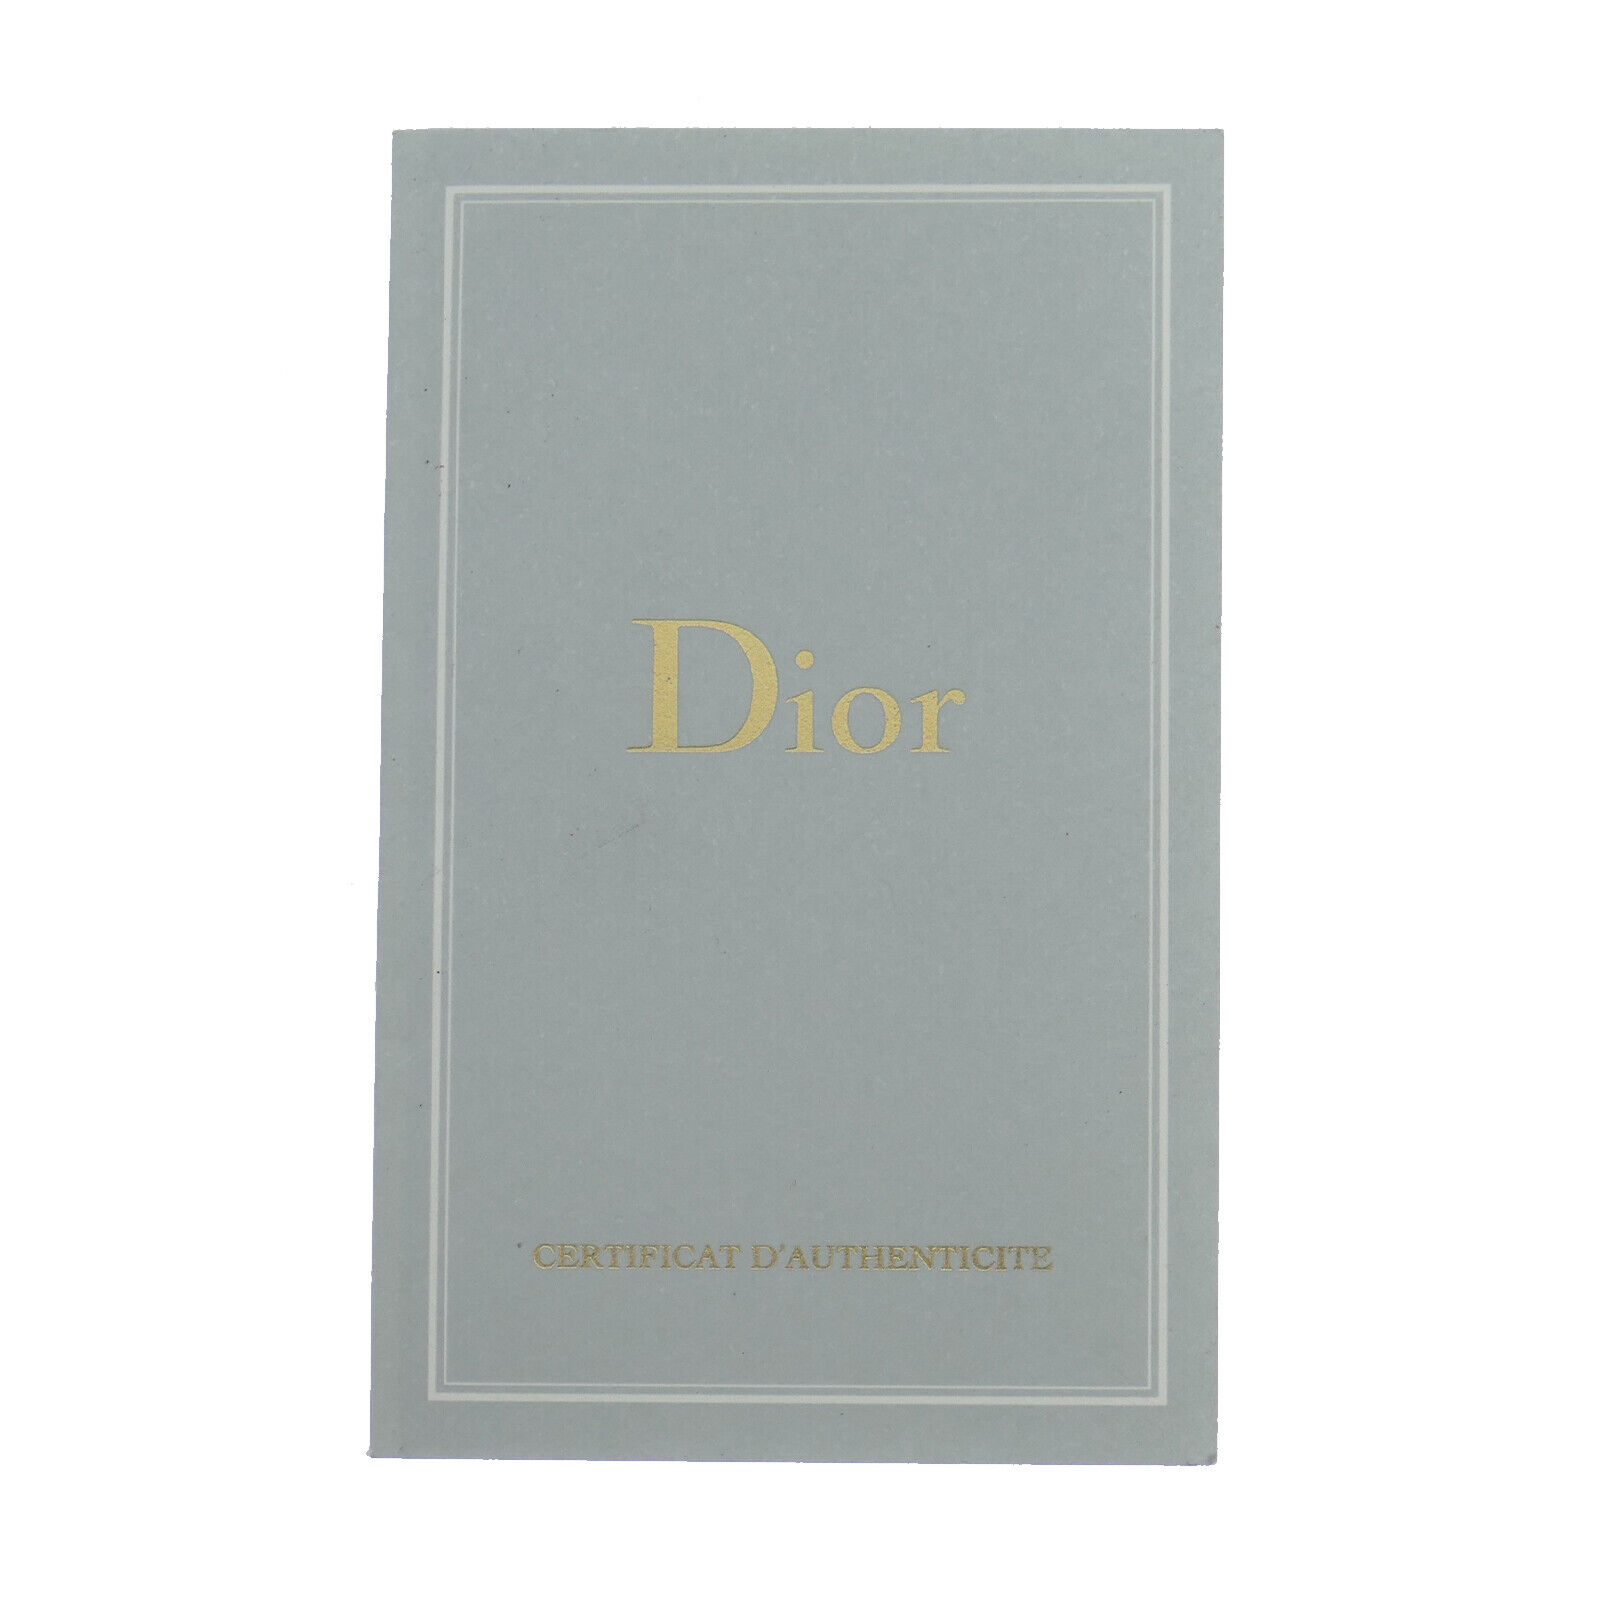 DIOR WATCH CERTIFICAT D'AUTHENTICITE - FILLED OUT